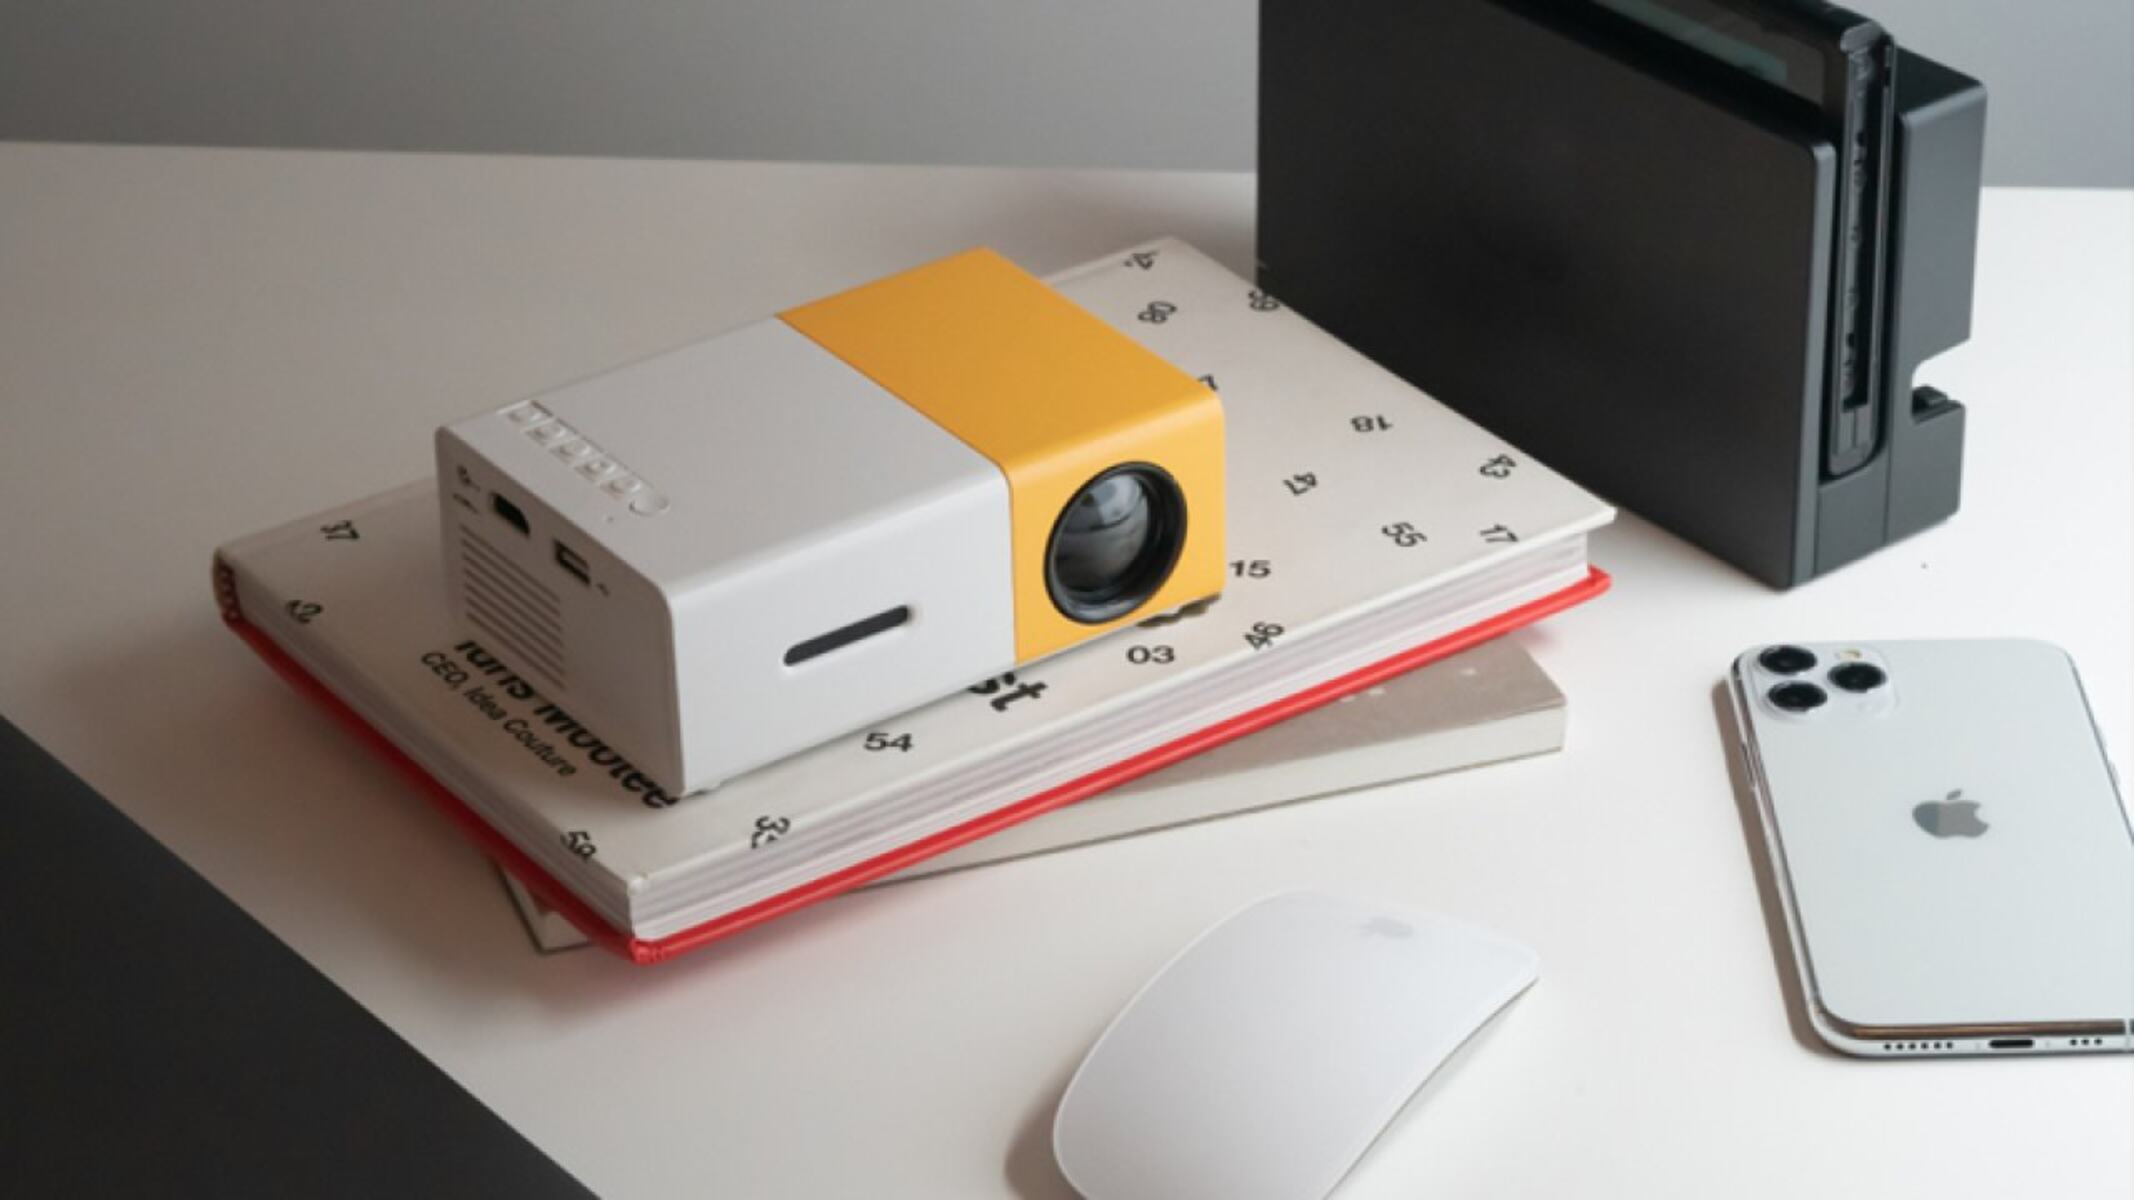 How To Use Meer Mini Projector